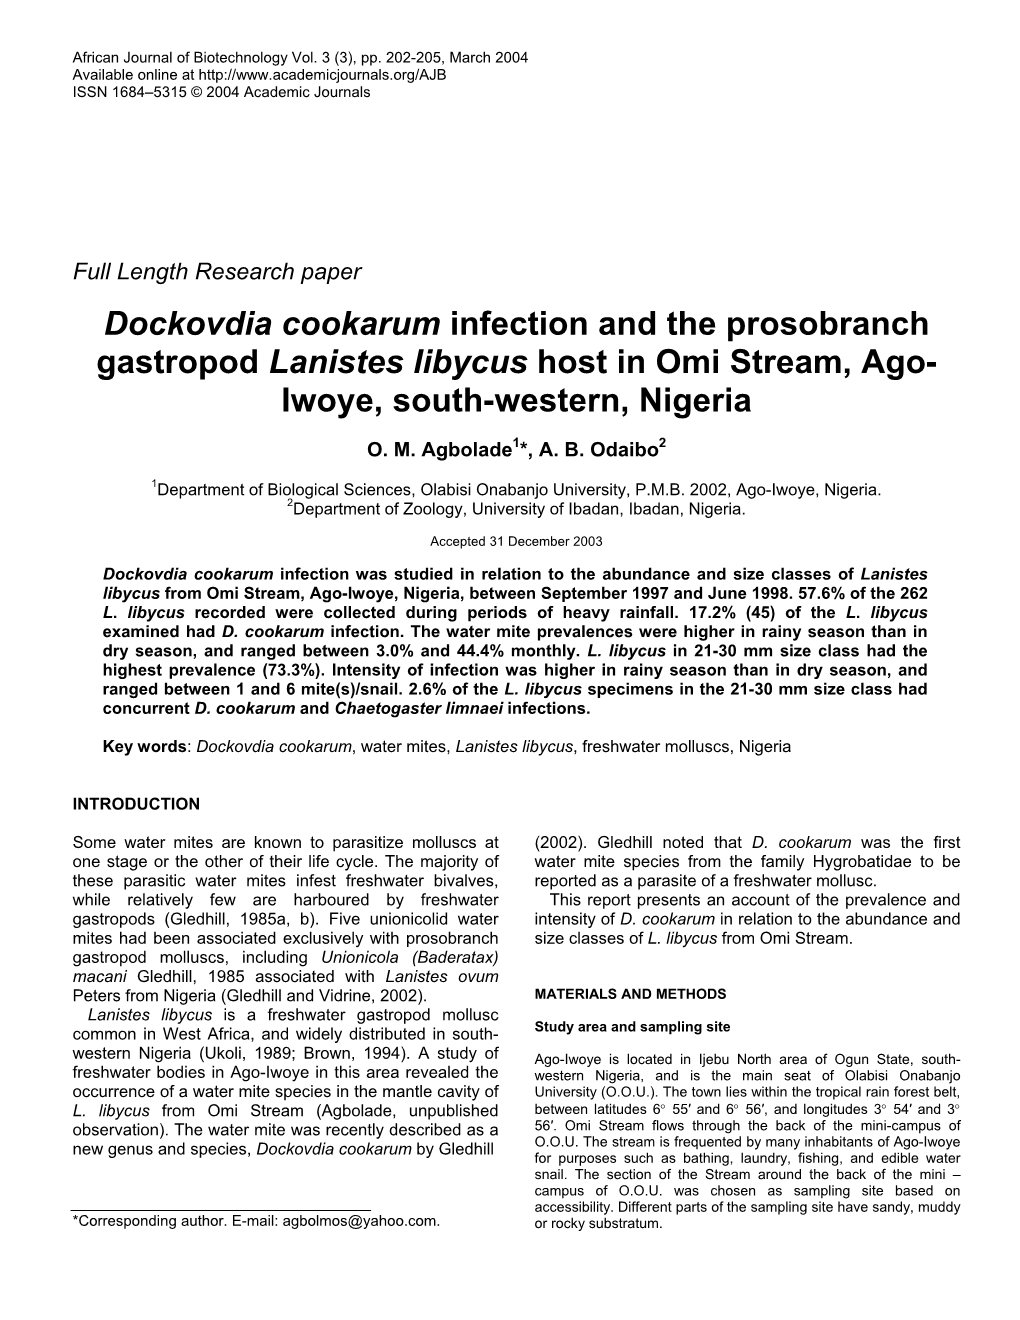 Dockovdia Cookarum Infection and the Prosobranch Gastropod Lanistes Libycus Host in Omi Stream, Ago- Iwoye, South-Western, Nigeria